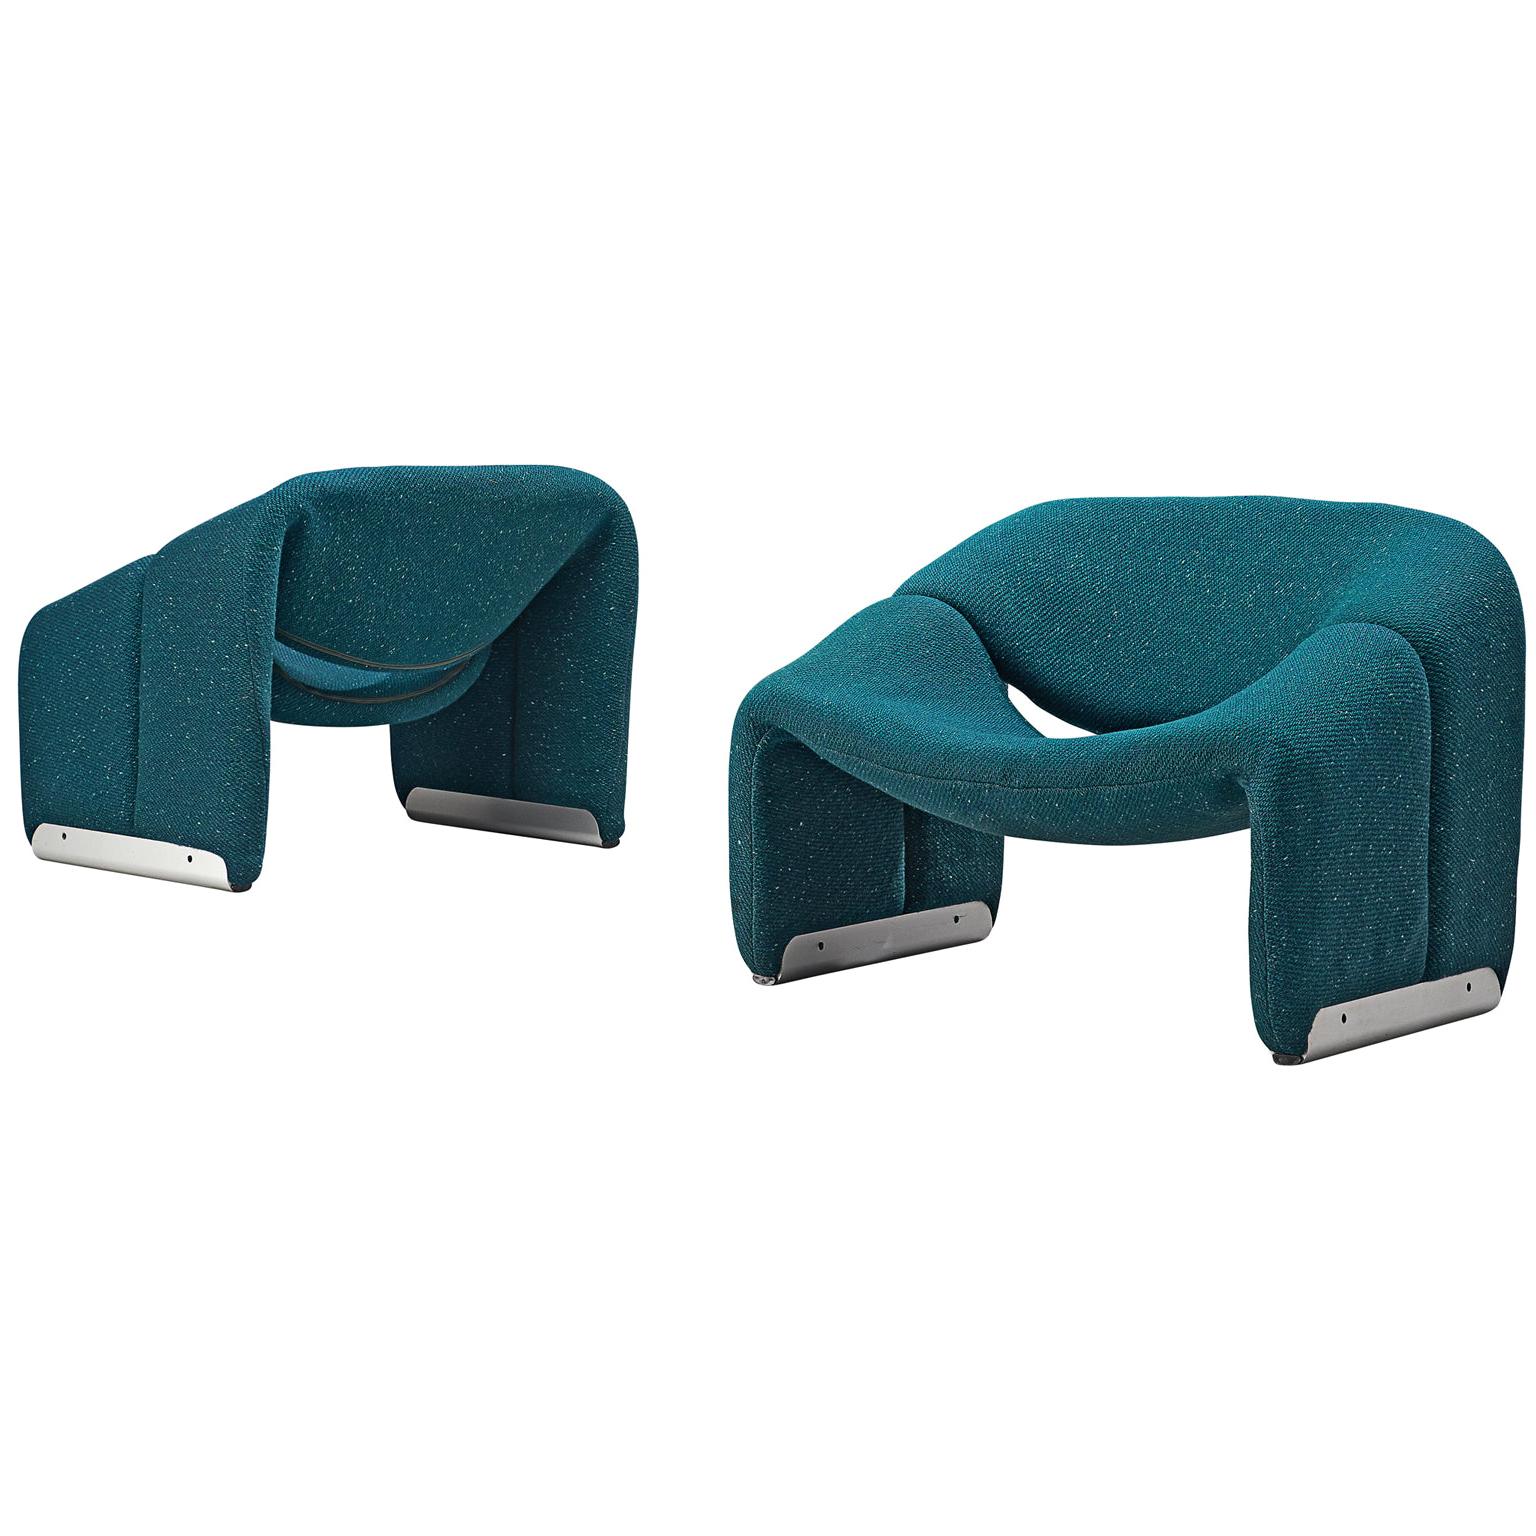 Pair of 'Groovy' Lounge Chairs by Pierre Paulin in Turquoise Fabric